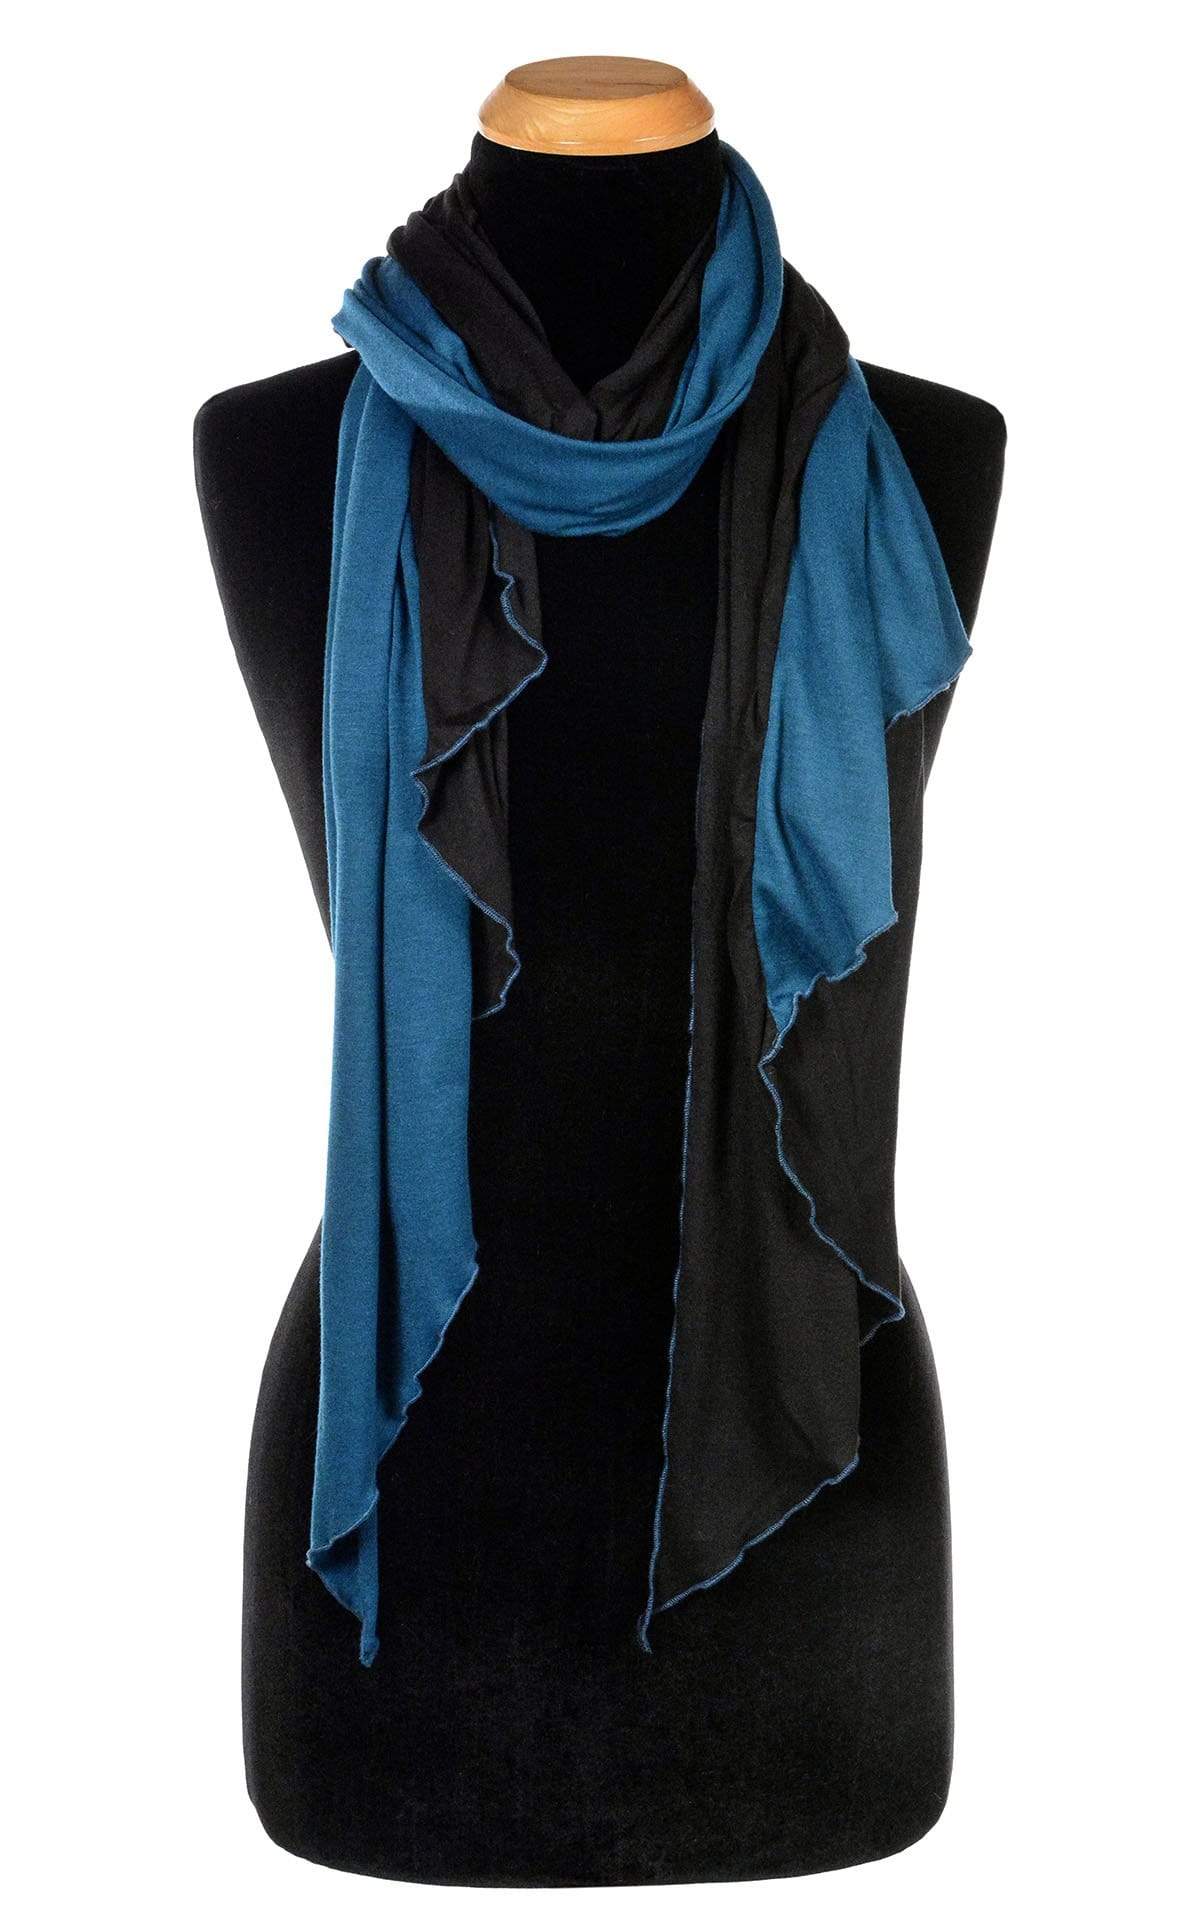 Ladies Large Handkerchief Scarf, Wrap jersey knit fabric on a mannequin | Abyss W/ Blue Moon, black and  Blue | Handmade in Seattle WA | Pandemonium Millinery